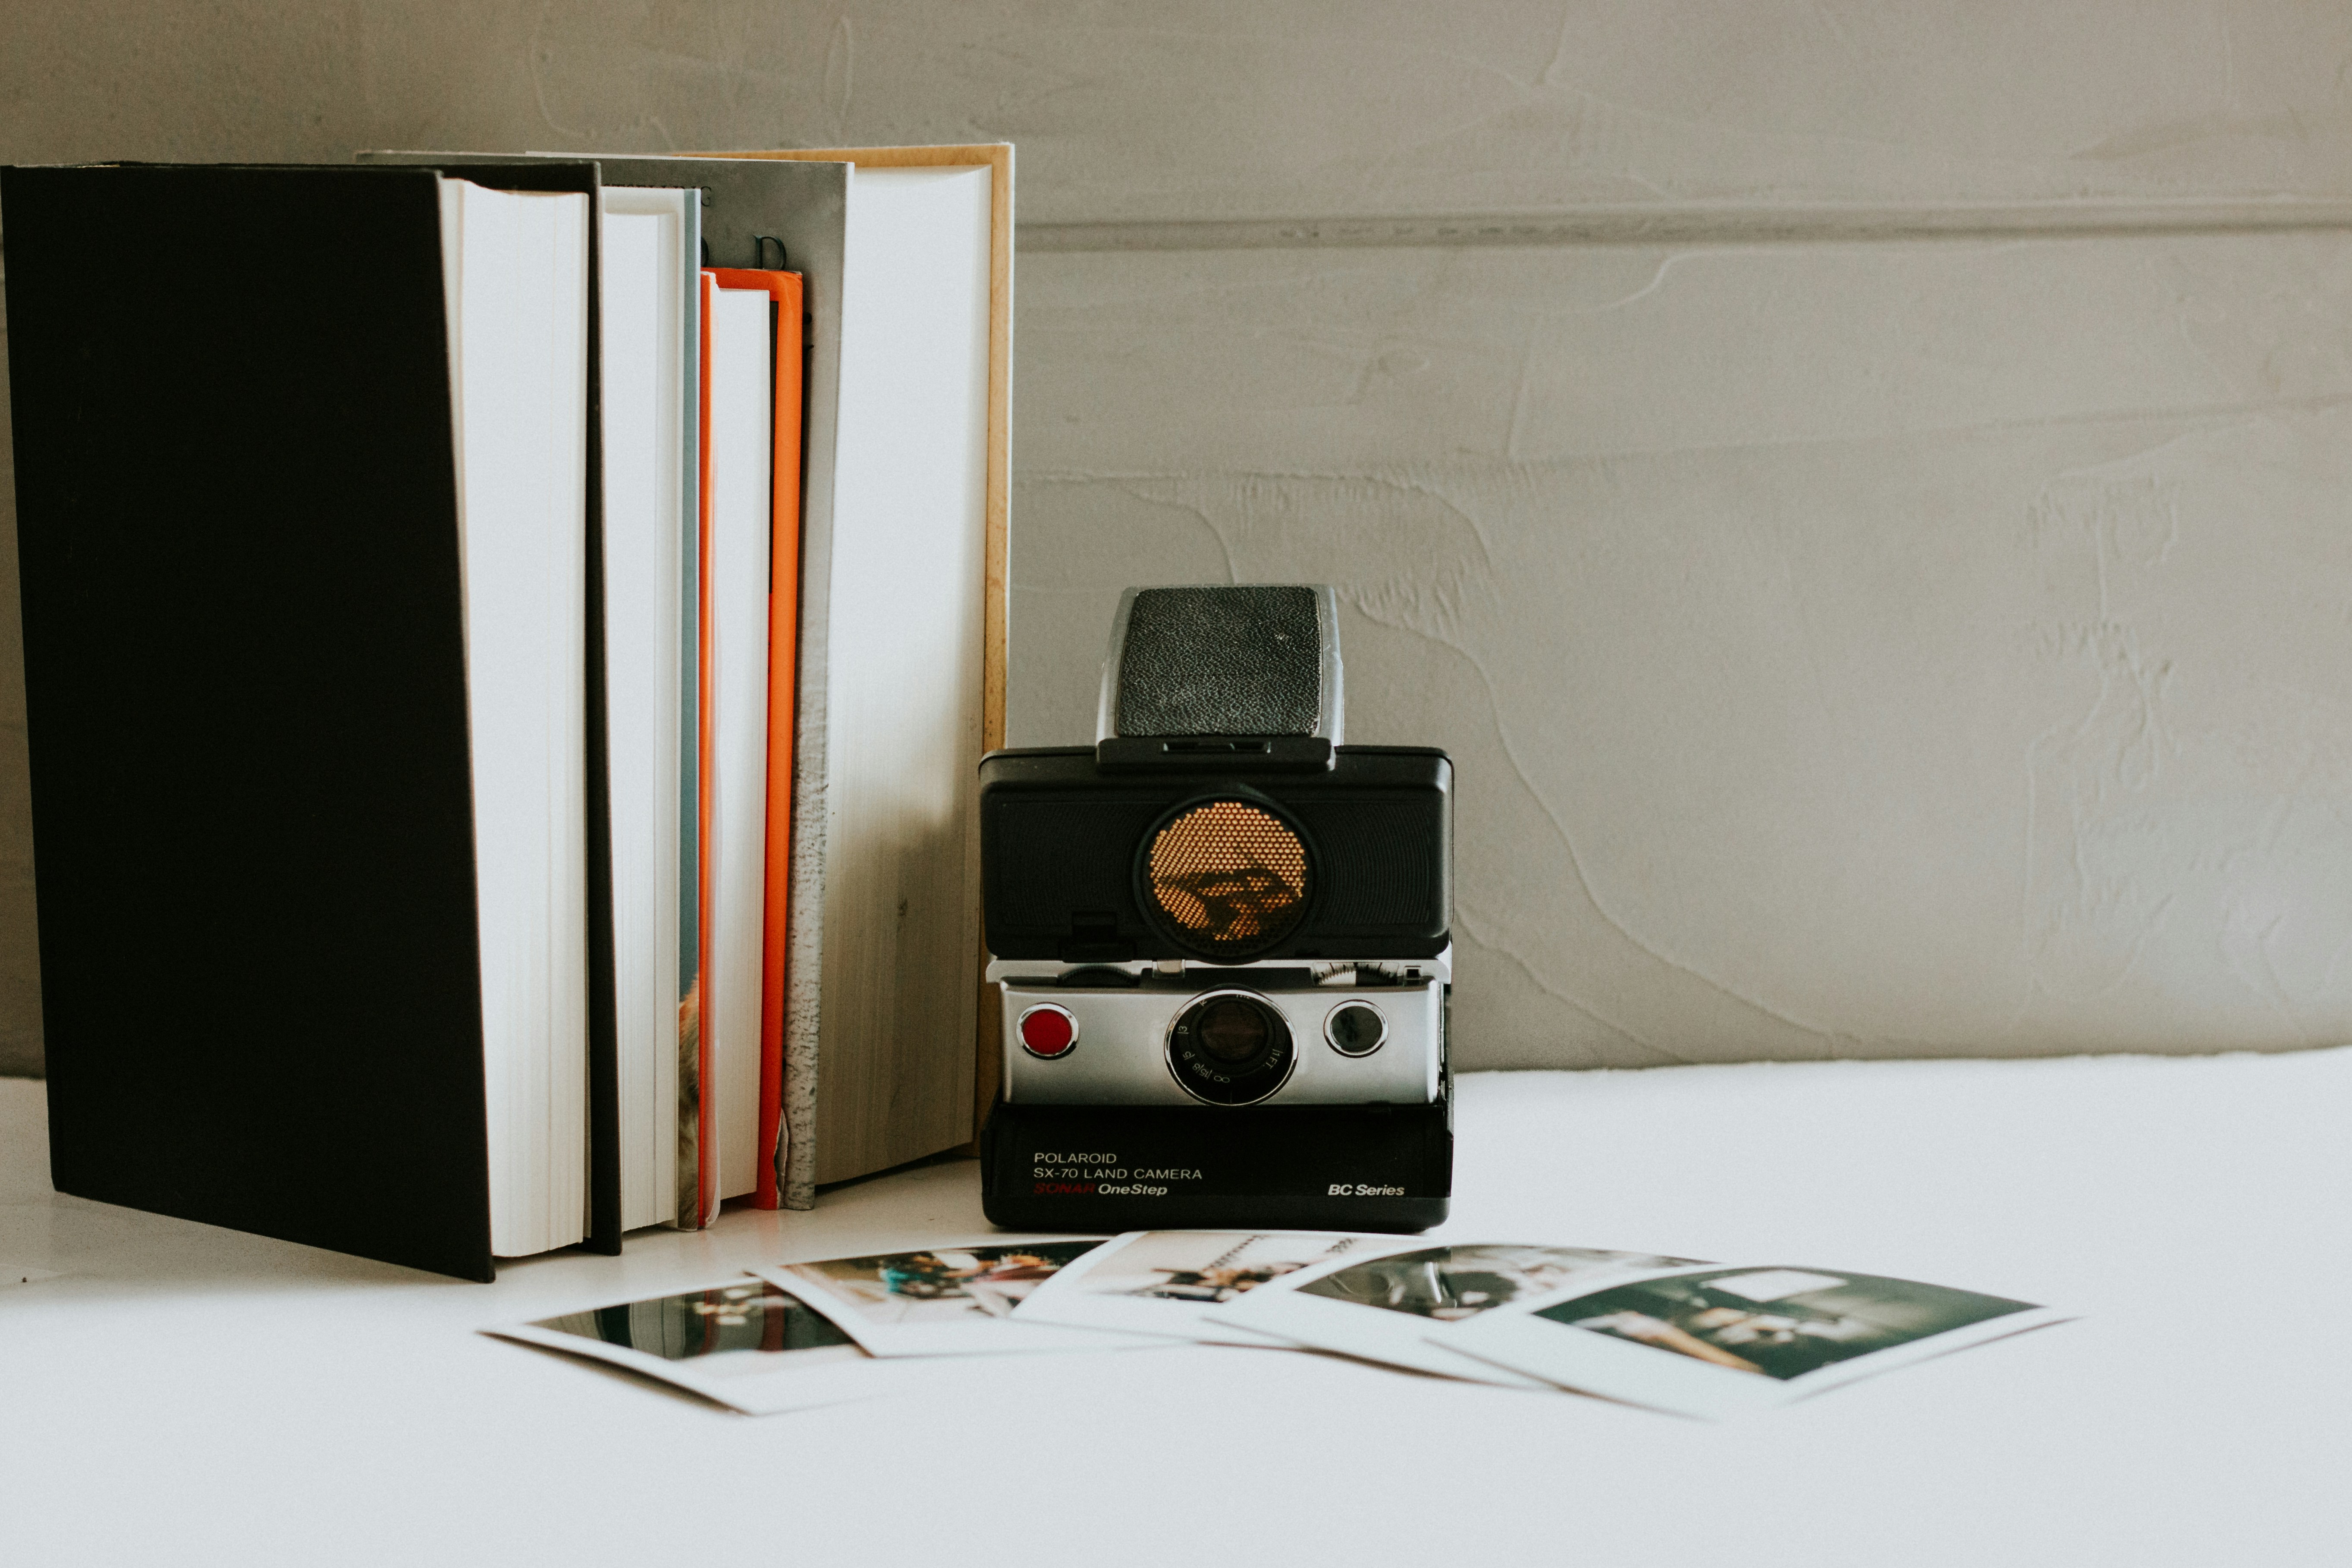 Choose from a curated selection of book photos. Always free on Unsplash.